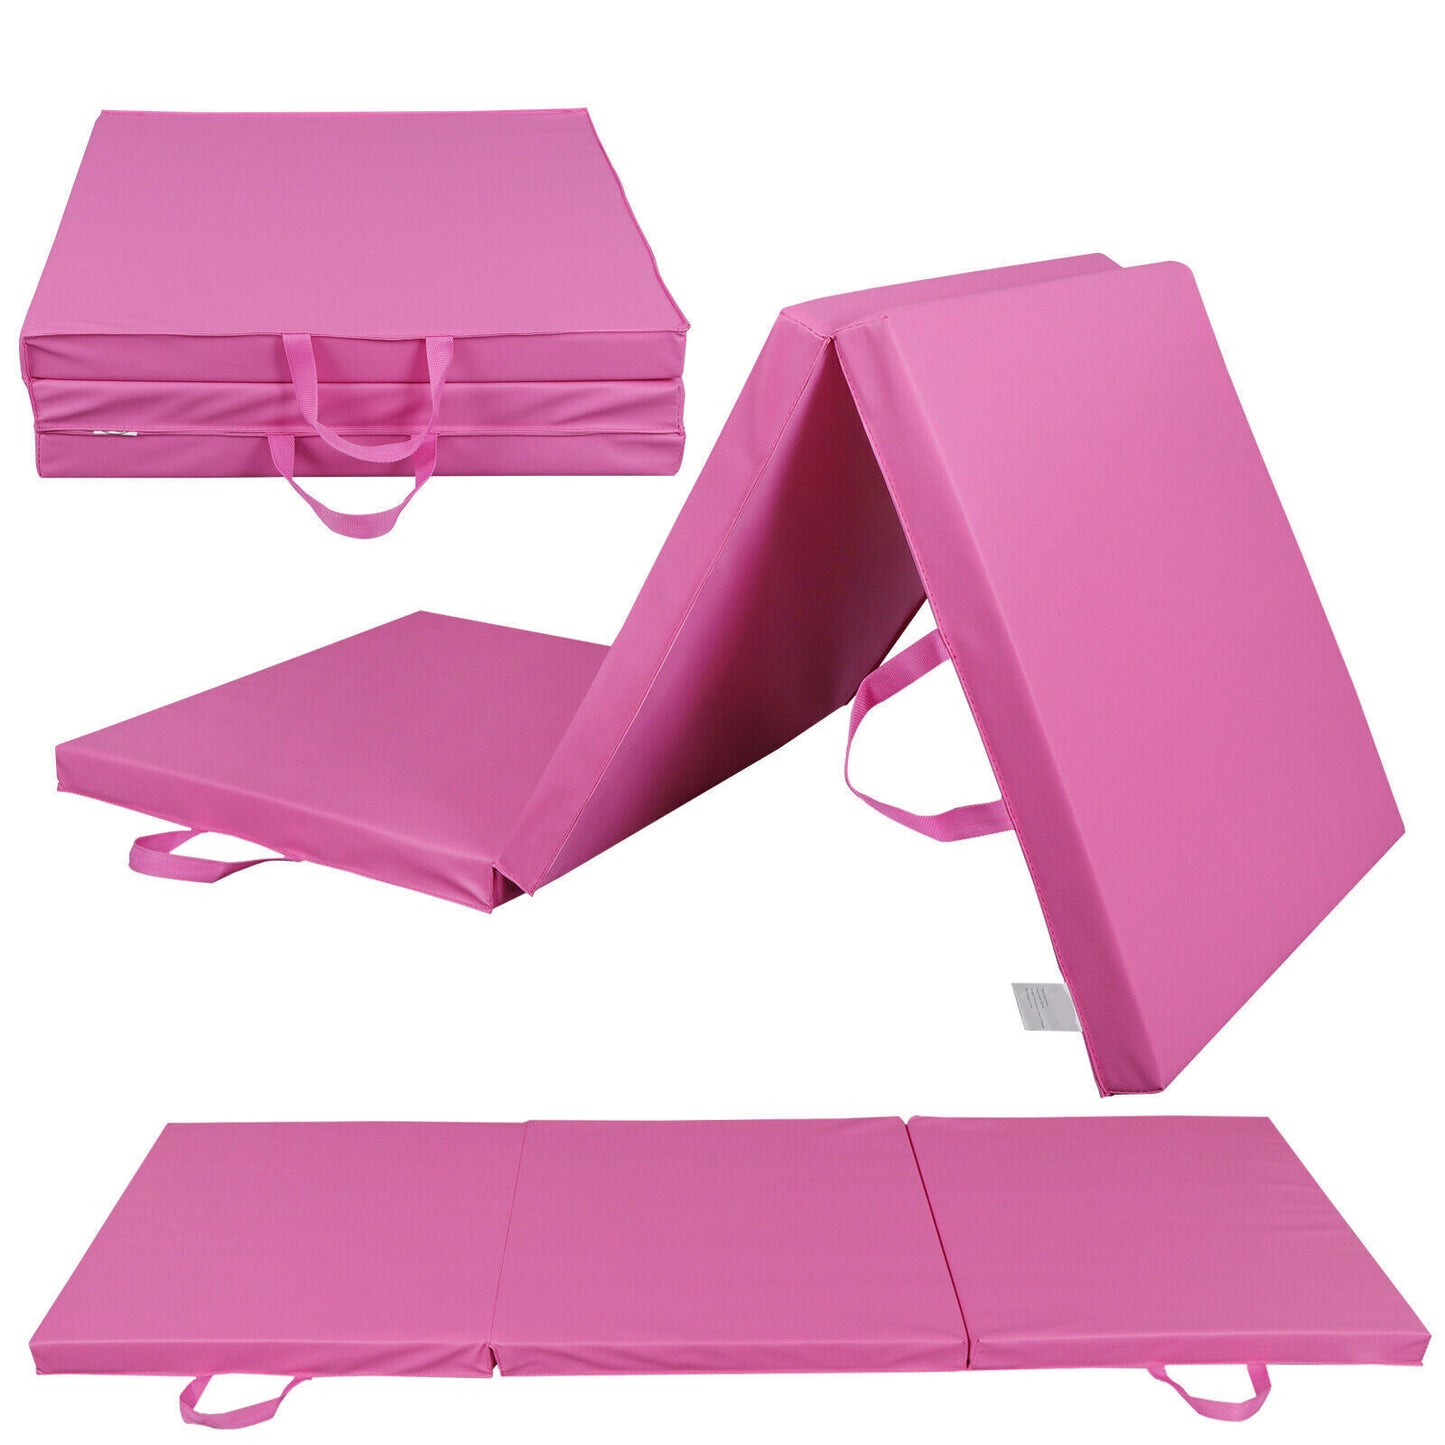 PU Leather Gym Mat Fitness Exercise Tri-Fold Tumbling Arts Workout Pink